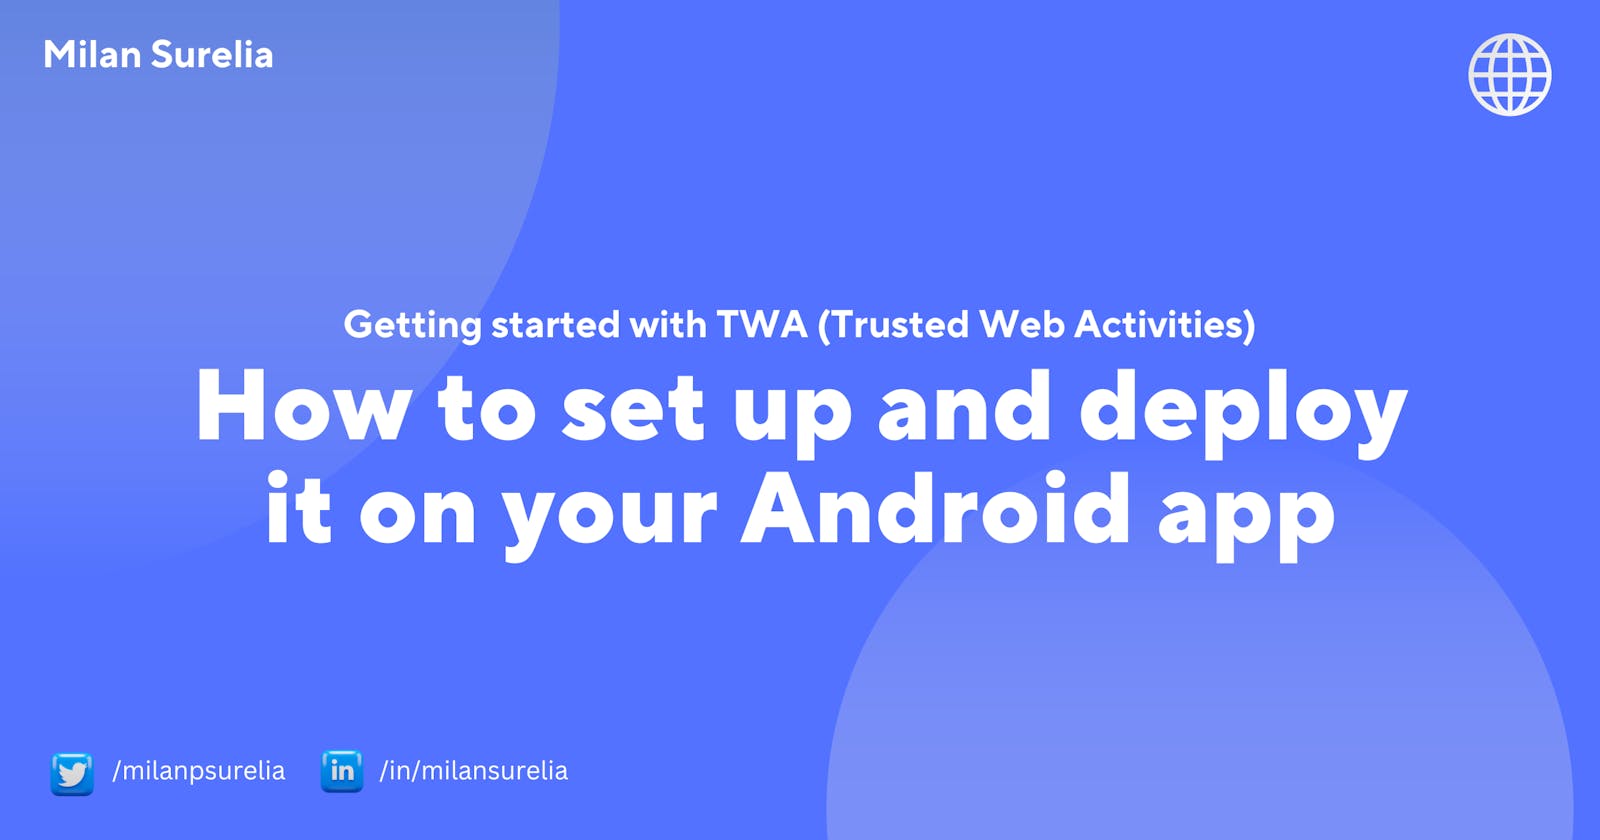 Getting Started with TWA: How to set up and deploy it on your Android app